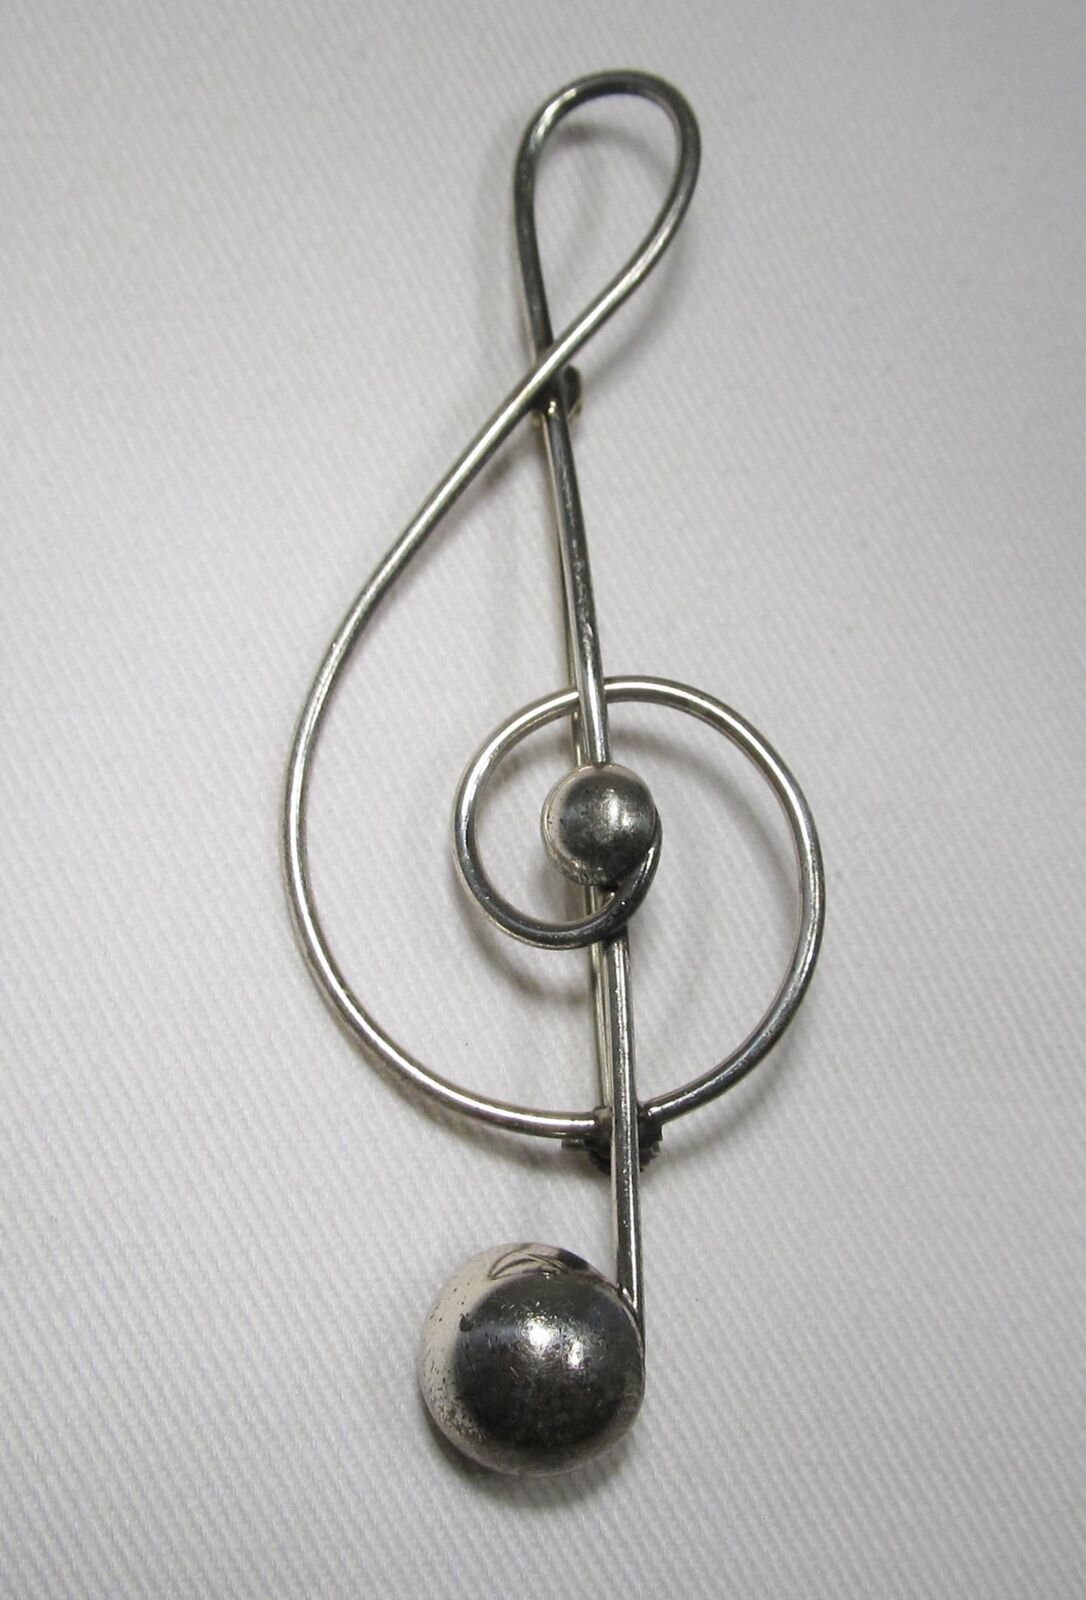 Primary image for Lang Sterling Silver Treble Clef Brooch Pin C1097